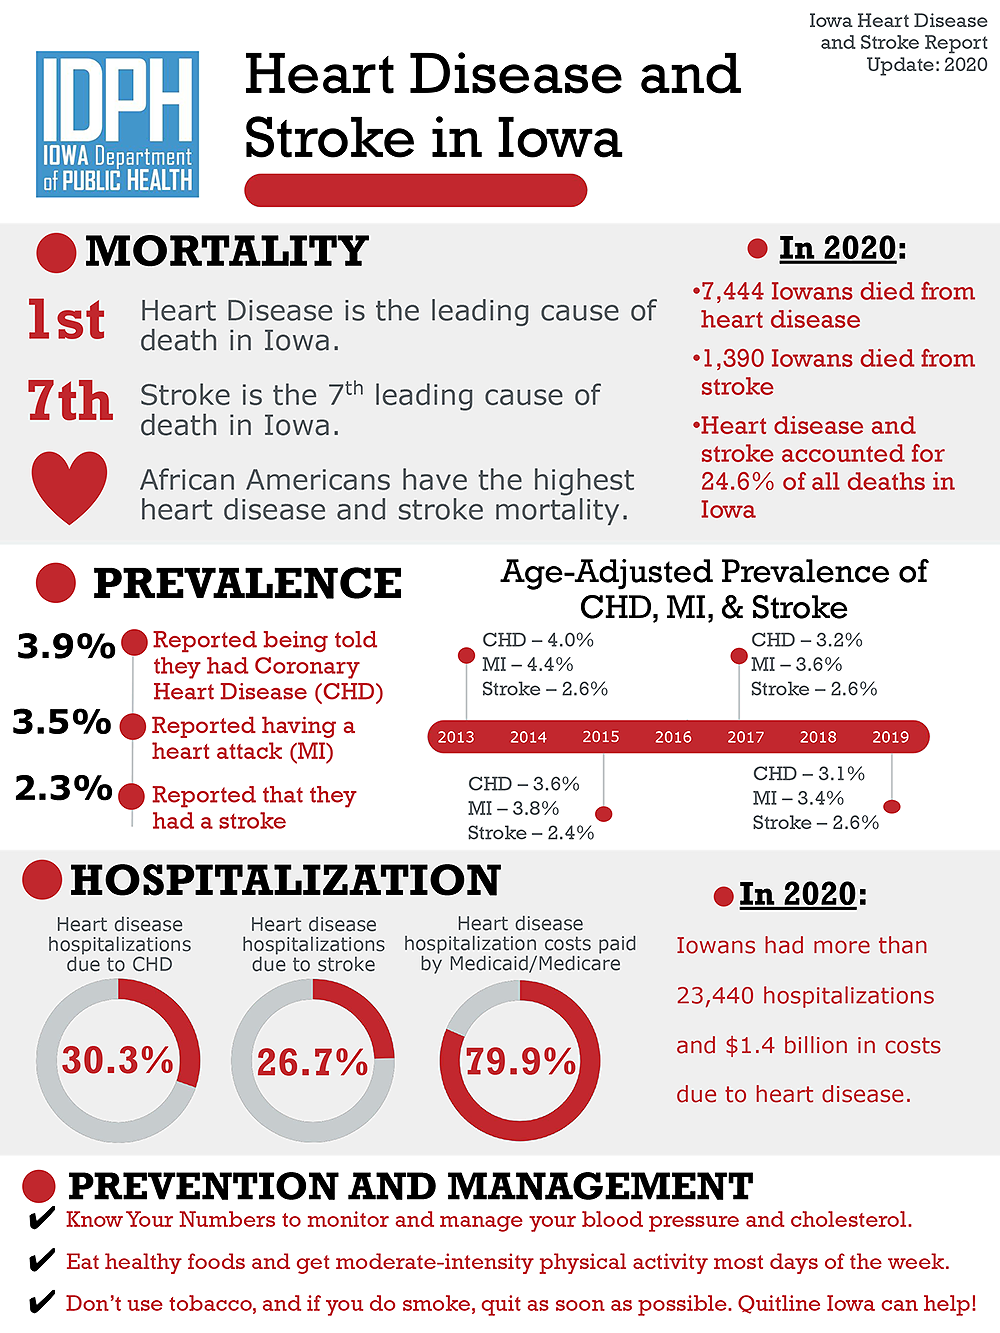 Heart Disease & Stroke Infographic 2020: See text below